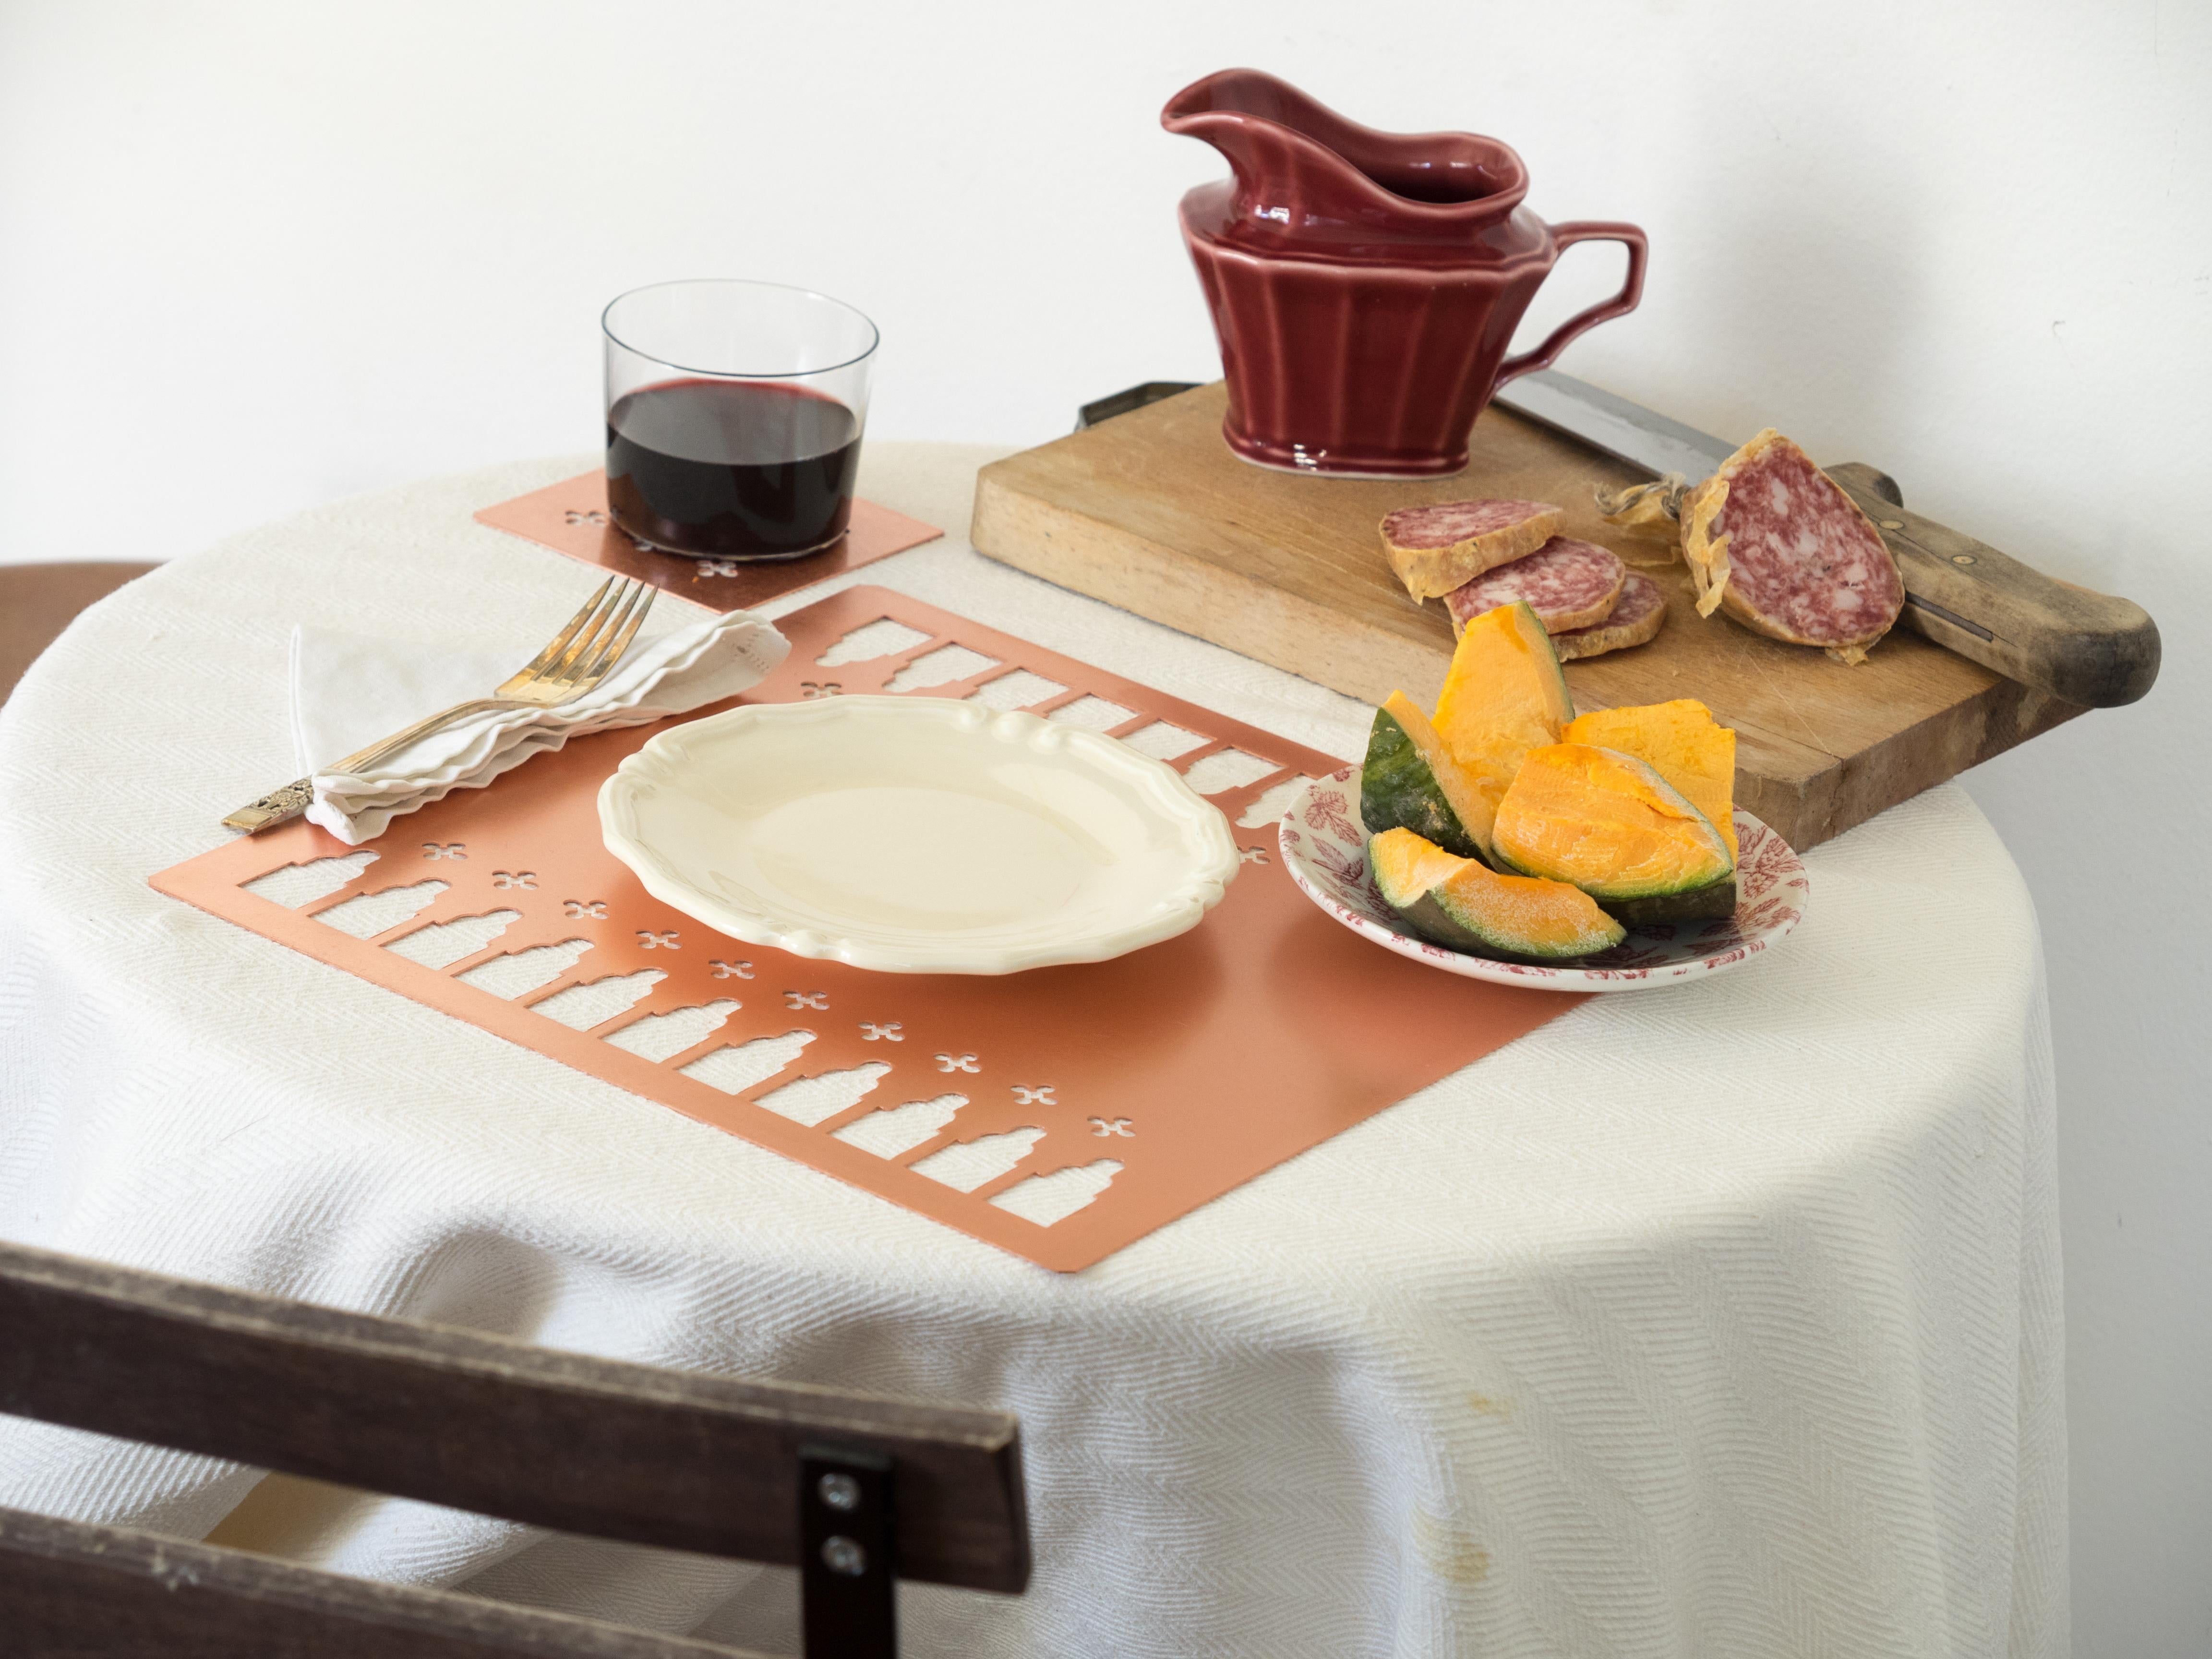 Contemporary 21st Century Copper Underplate Made in Italy Venetian Design Hand Made Placemat